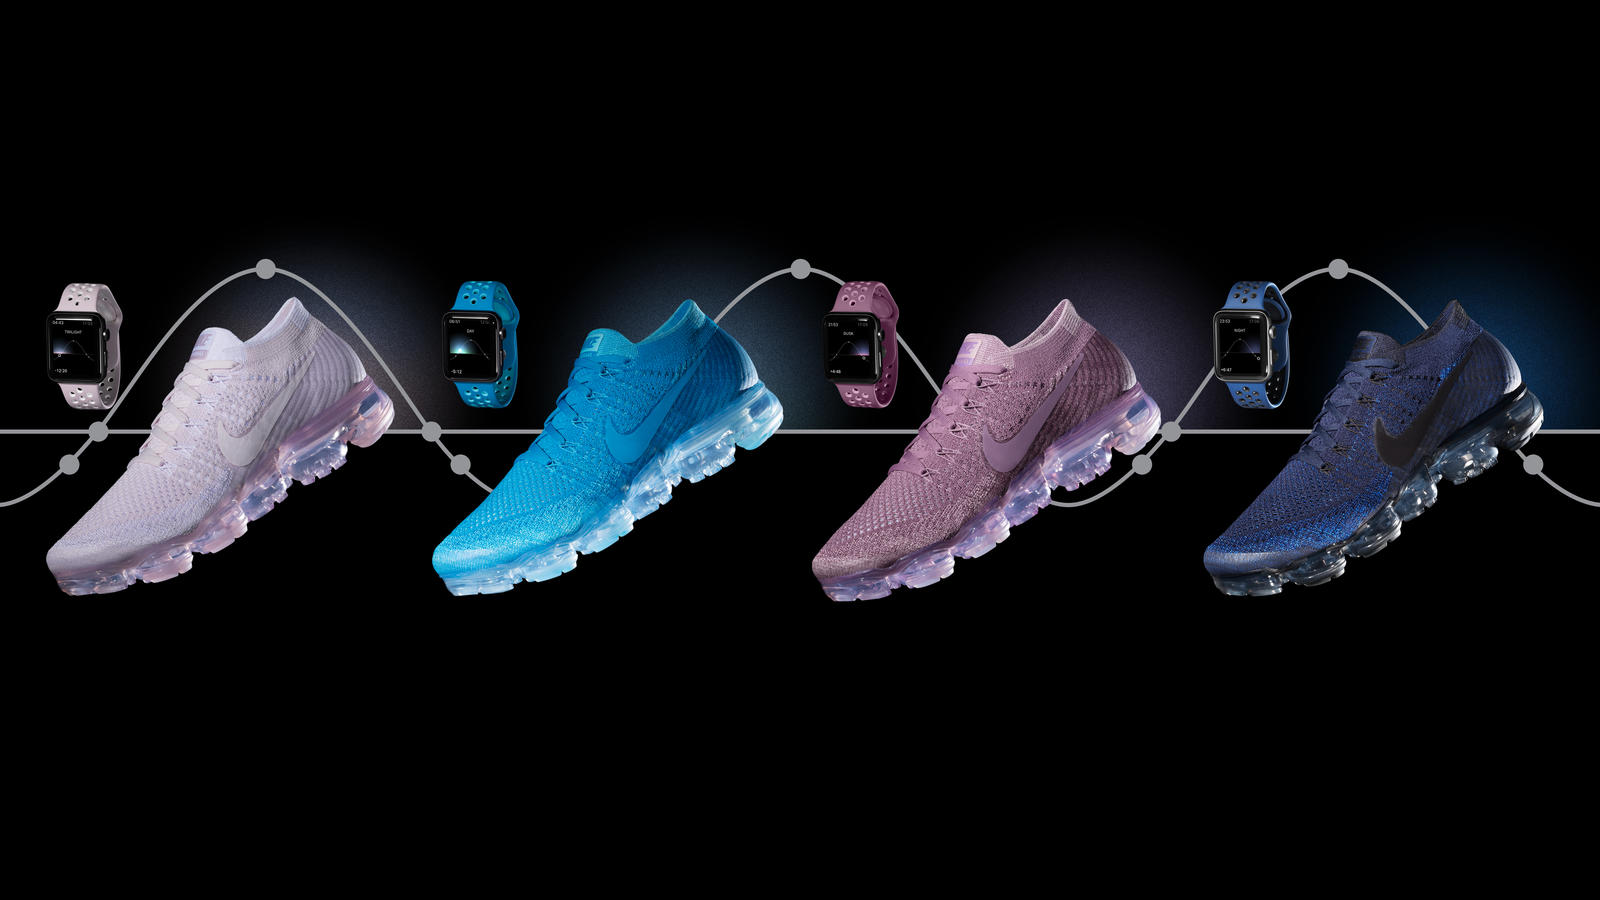 Nike launches “Day to Night” VaporMax Flyknit shoes with matching Apple Watch bands